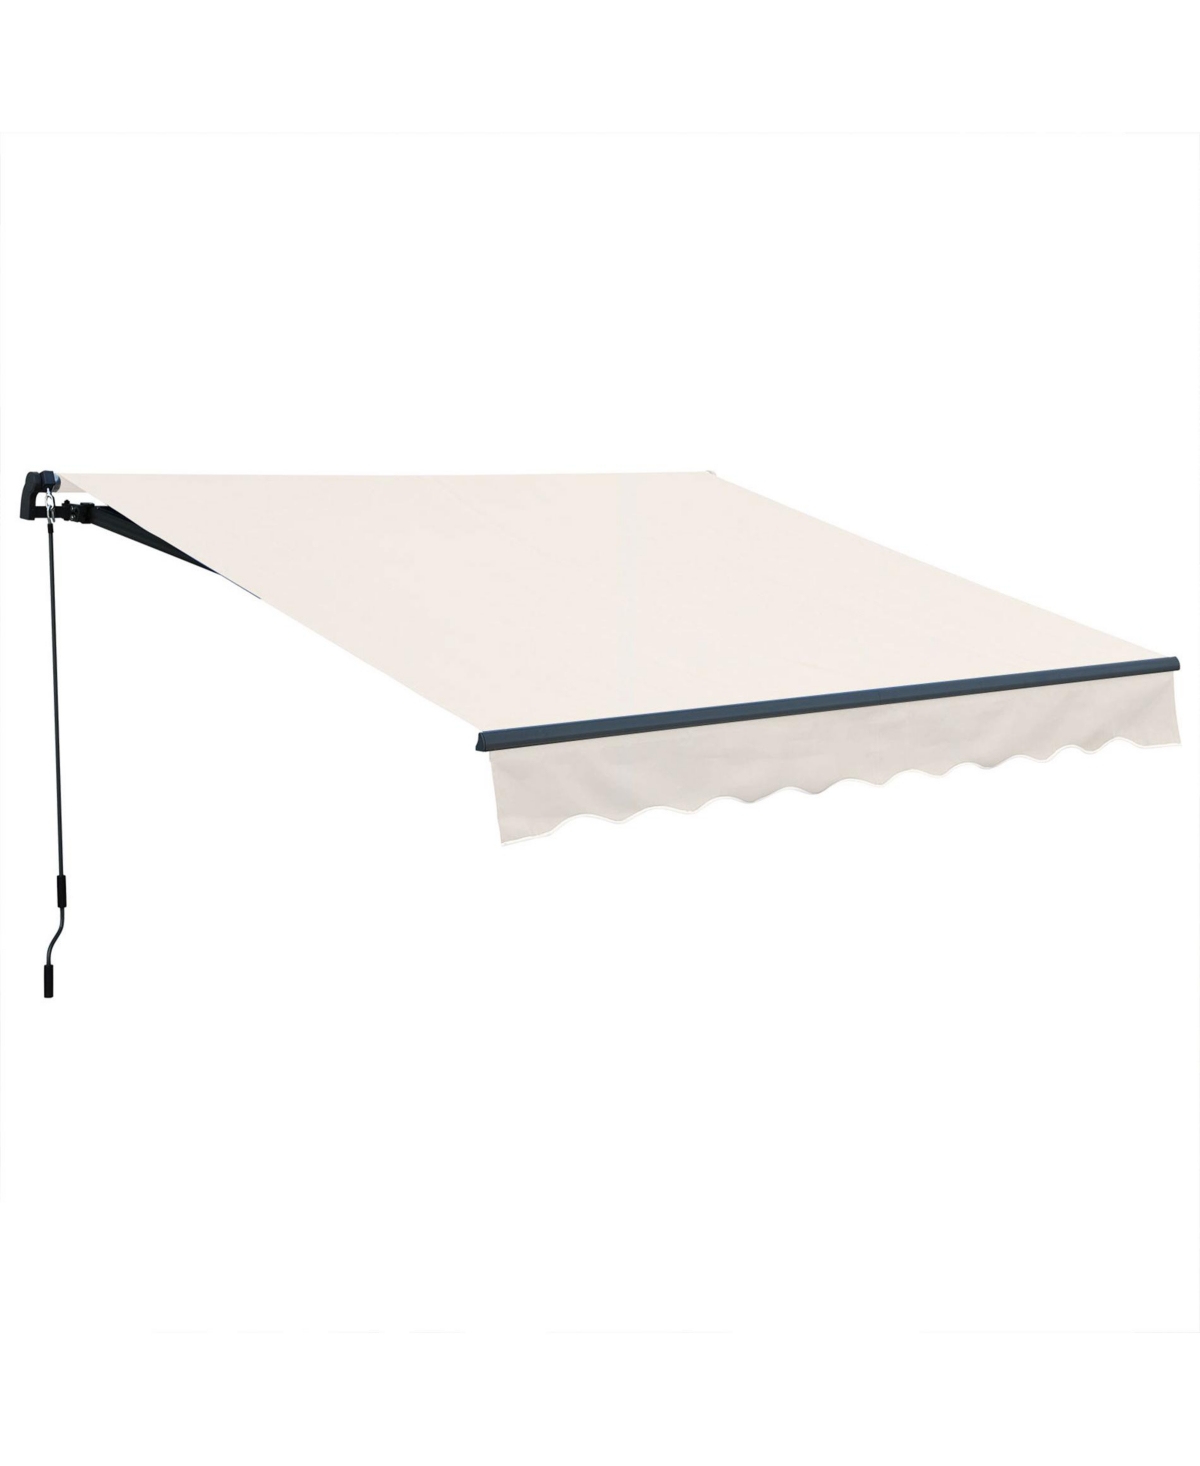 12'x 8' x 5' Retractable Window Awning Sunshade Shelter, Polyester Fabric, with Retractable Brackets and Three Wall for Yard, Patio, Door, Balc